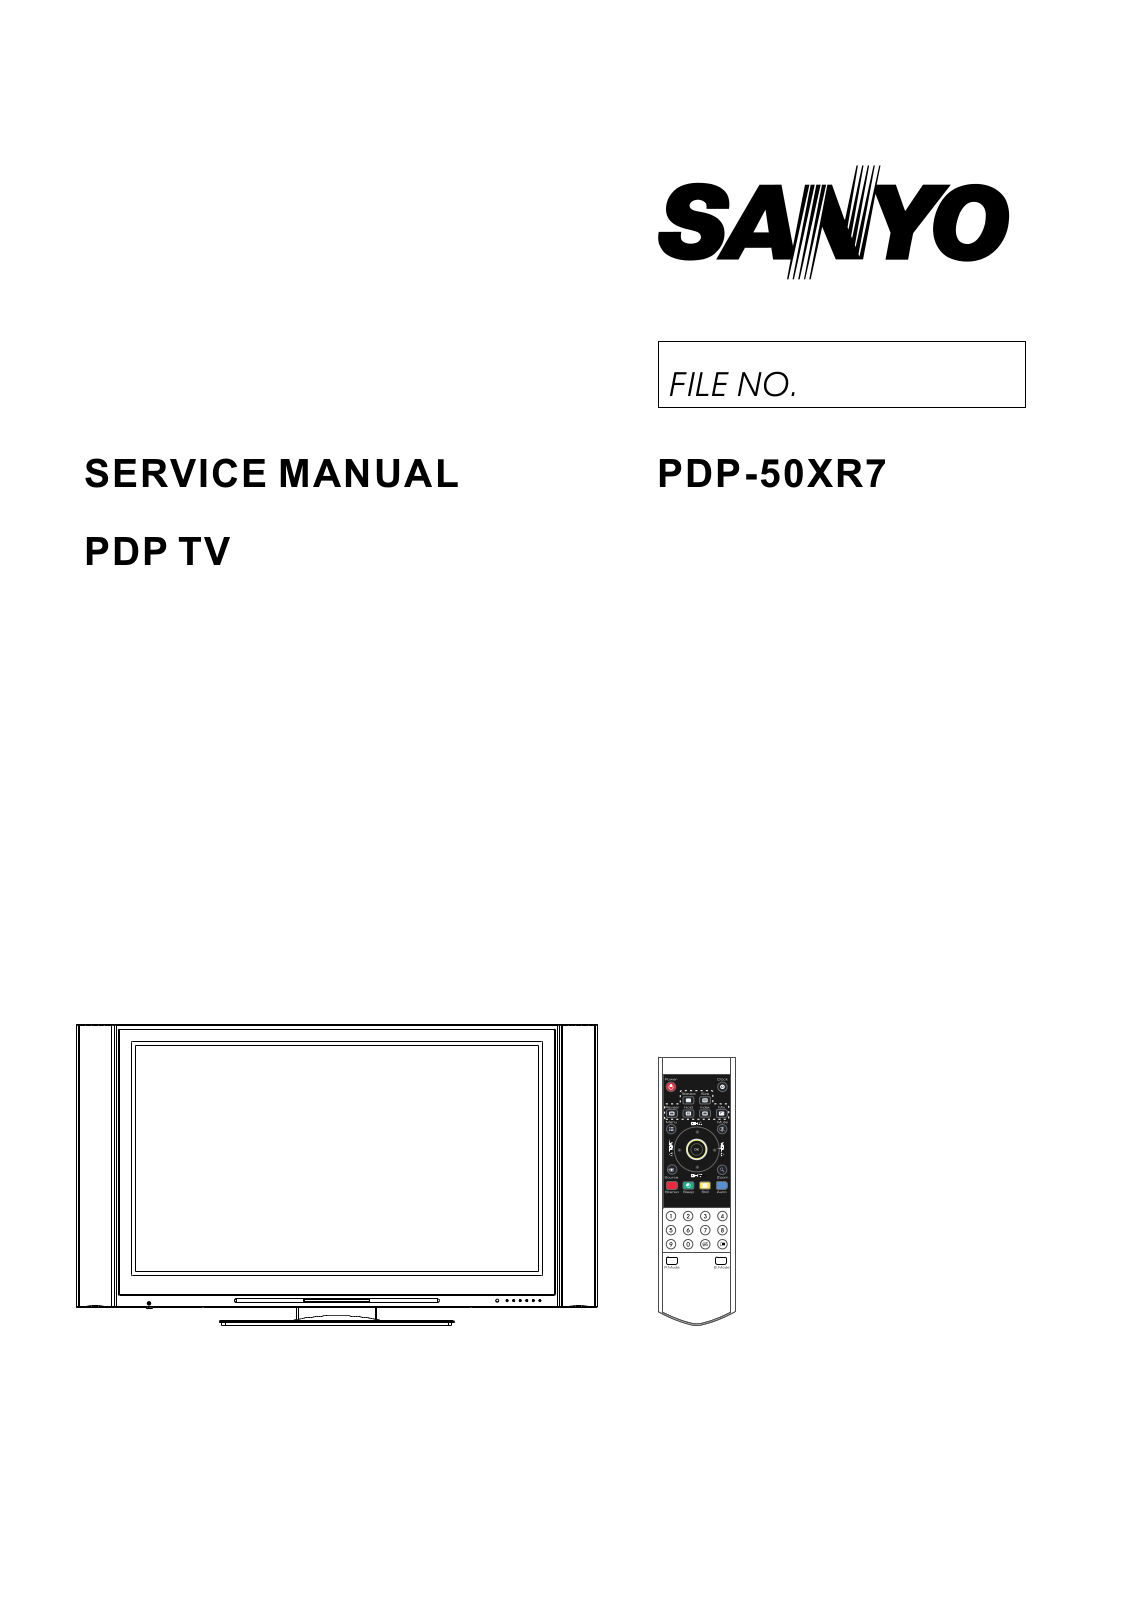 Sanyo PDP-50XR7 Schematic